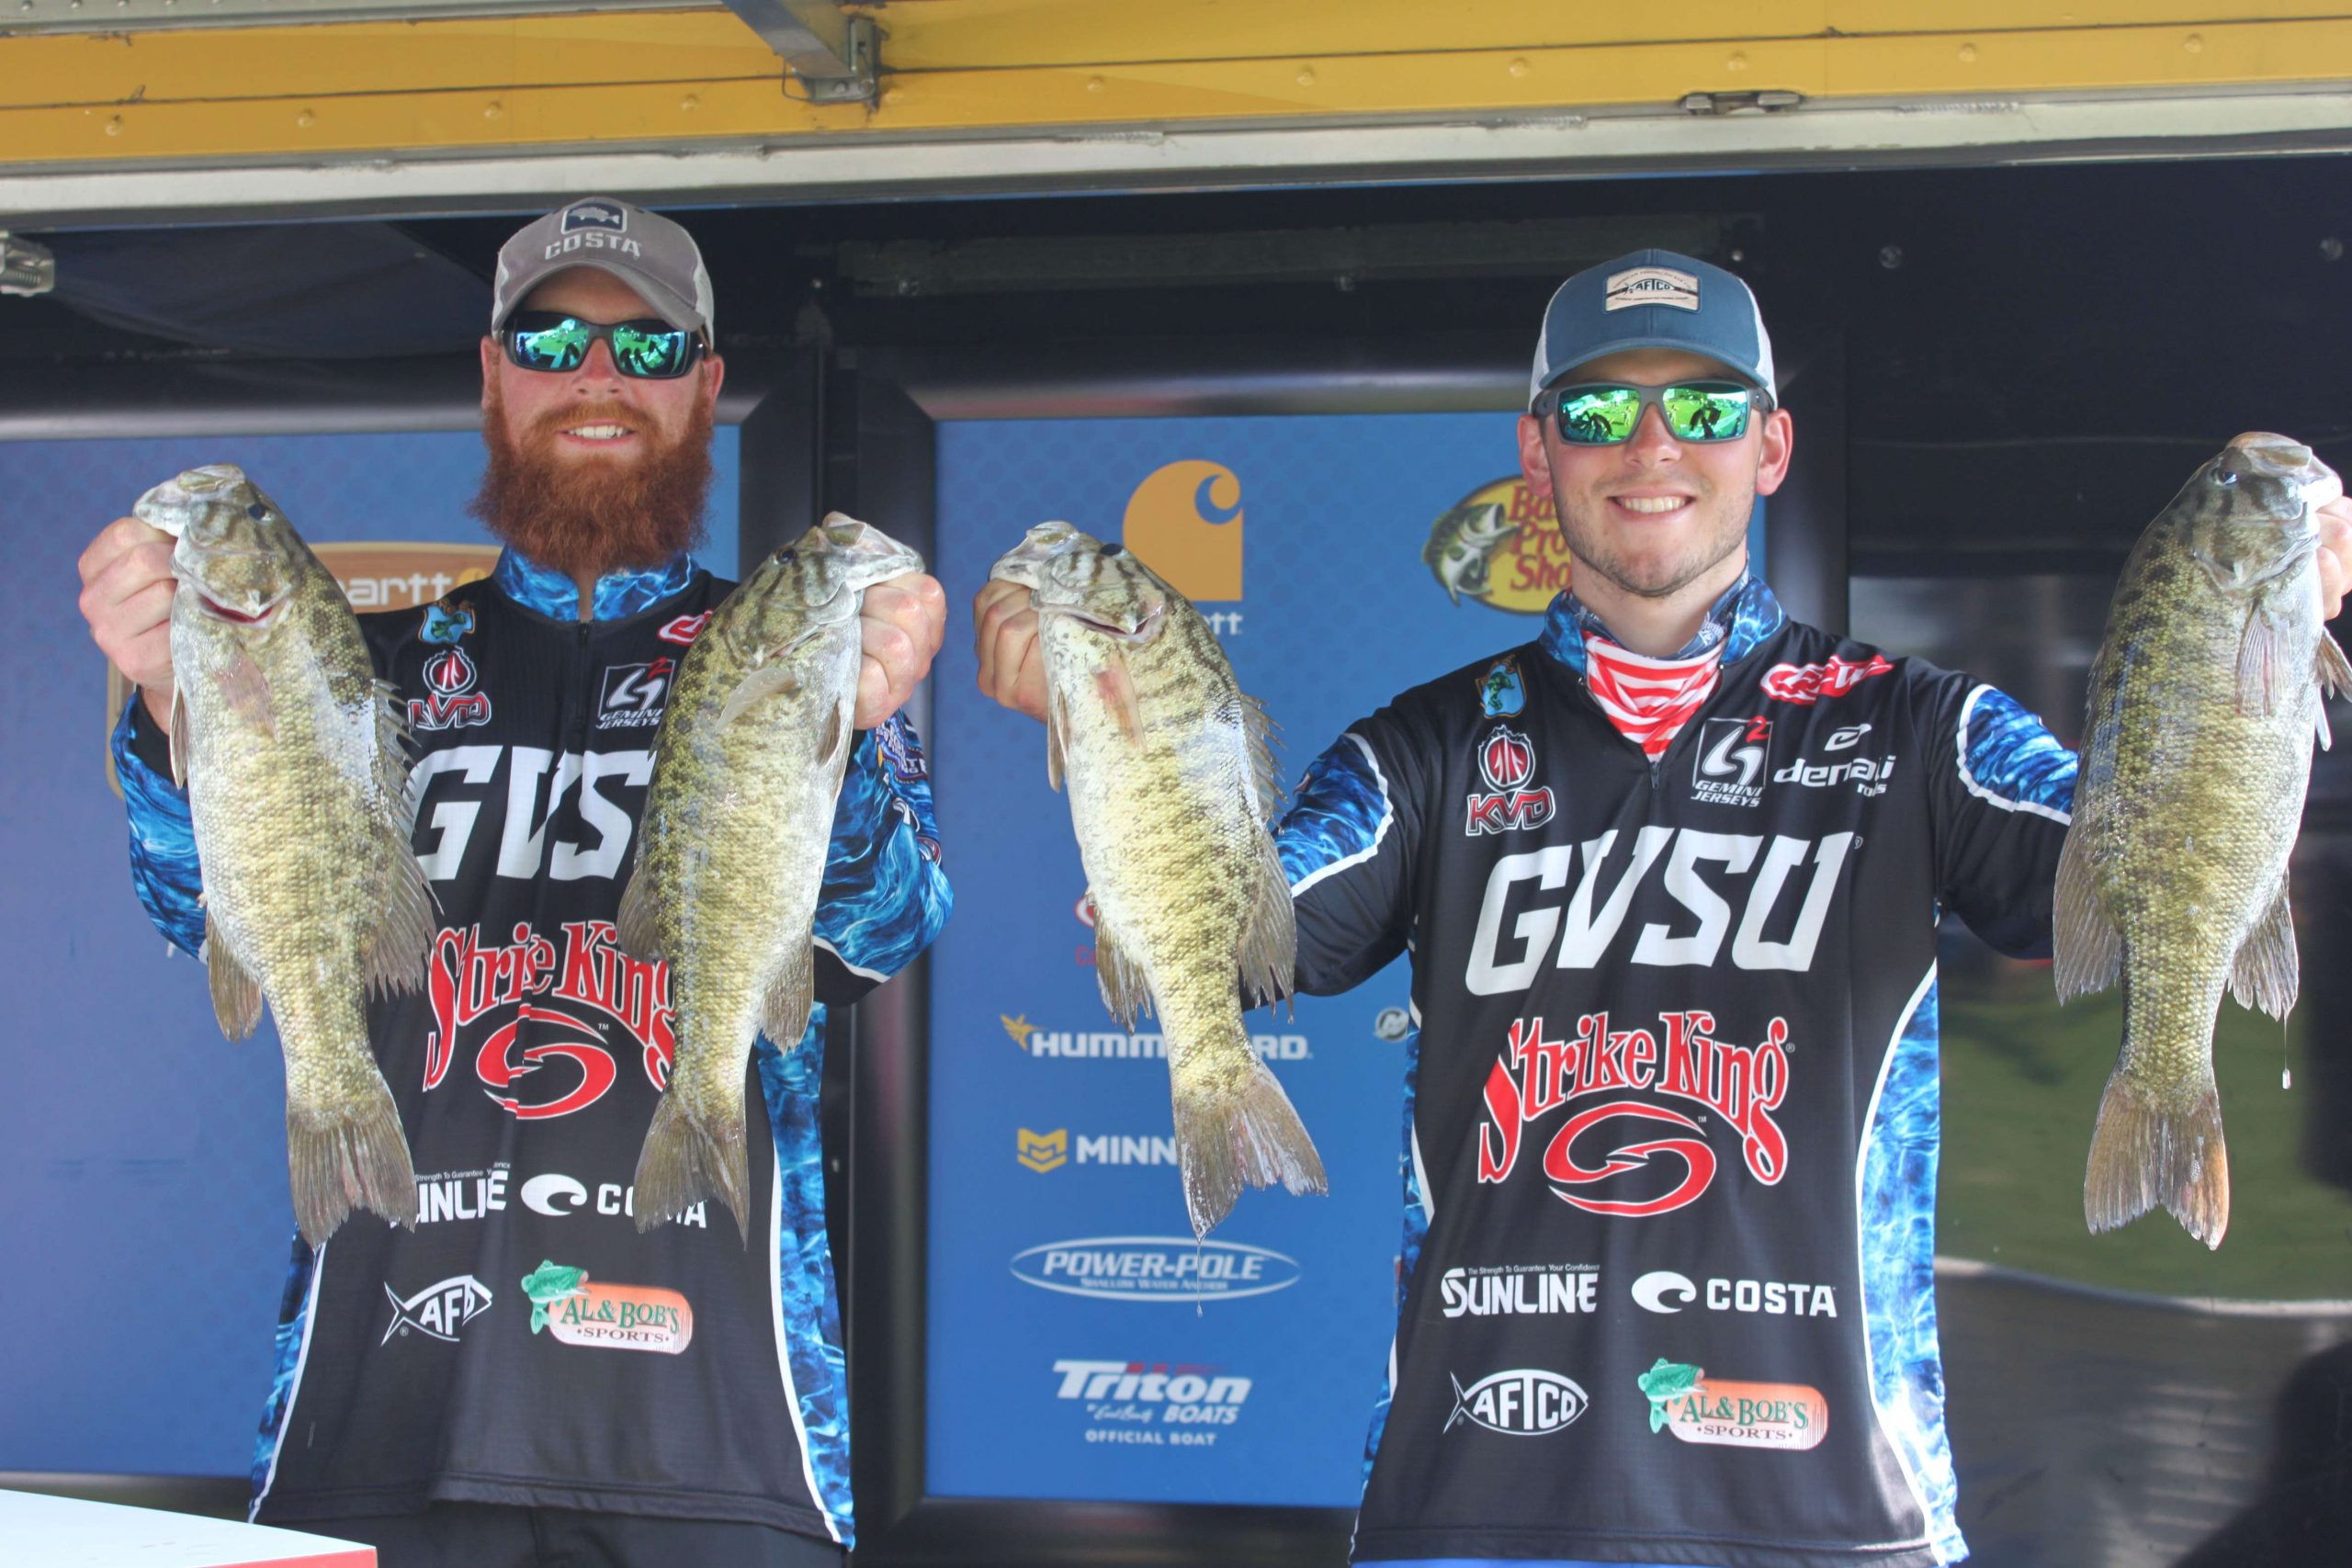 Lucas Murphy and Nolan Hitt of Grand Valley State University are in third place with 29-1.